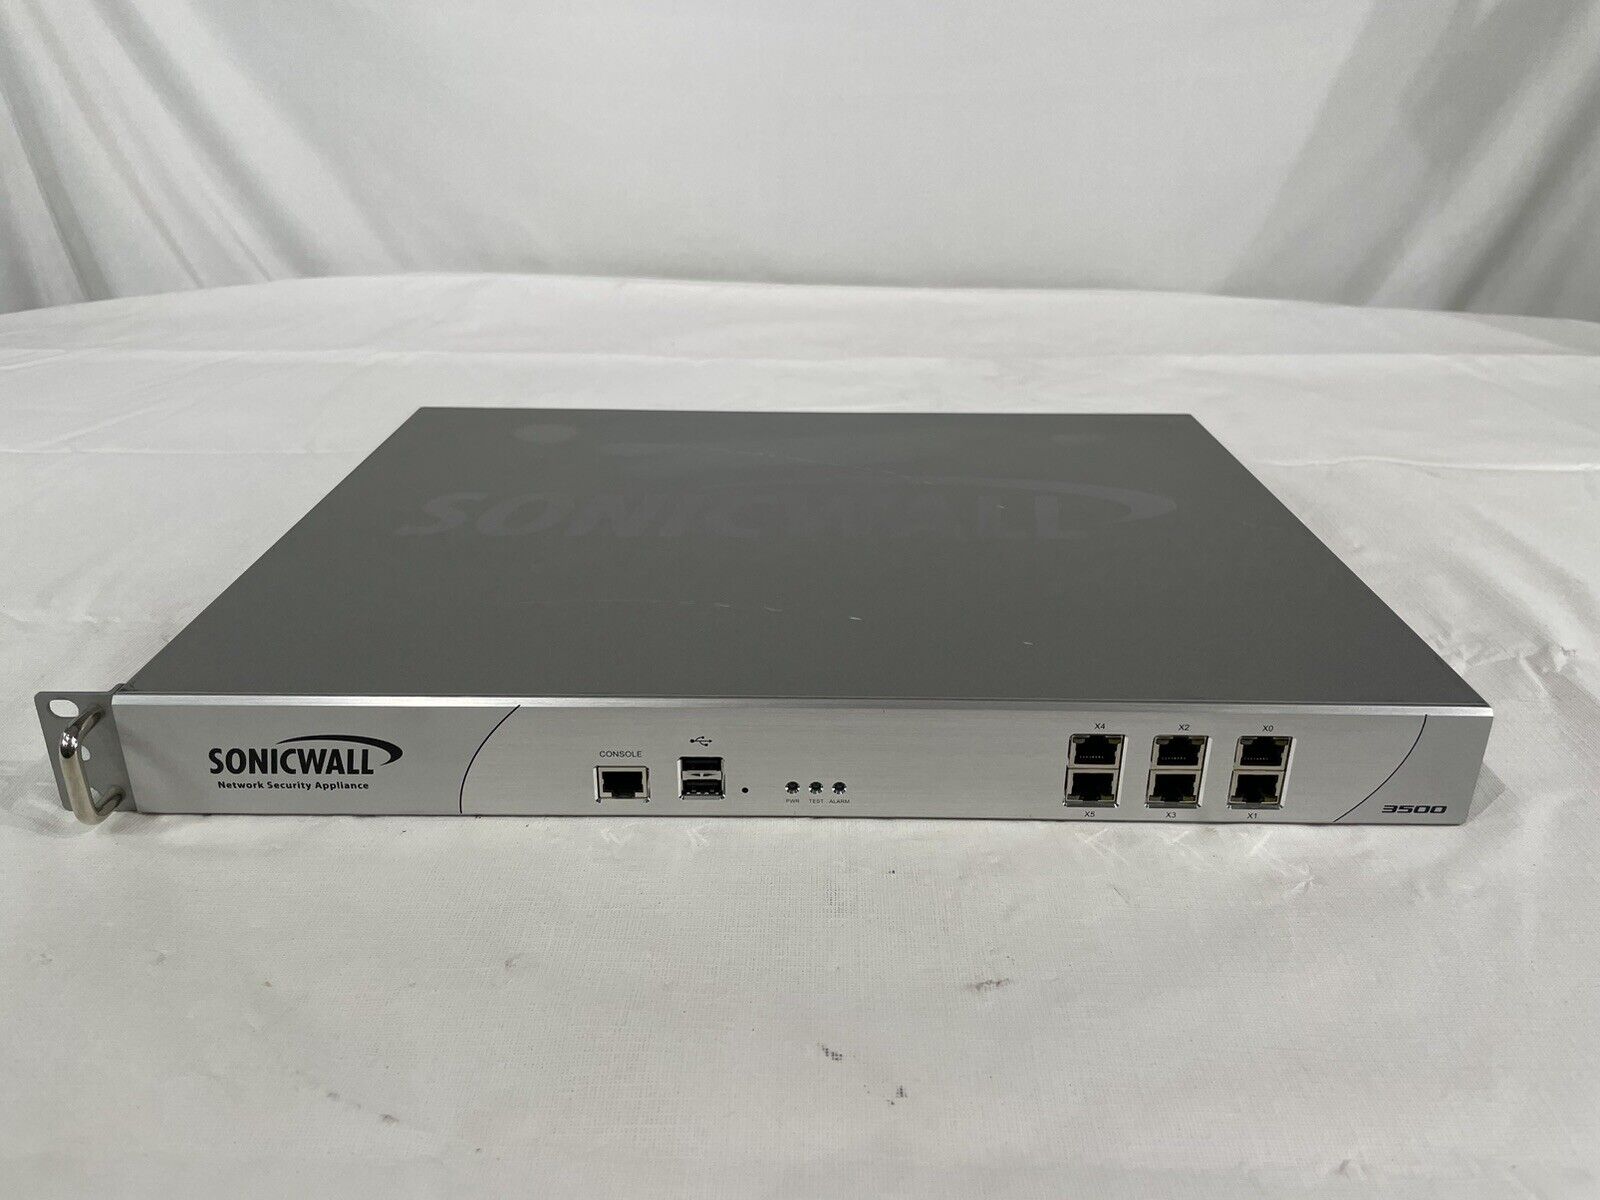 SonicWall NSA 3500 Network Security Appliance Firewall